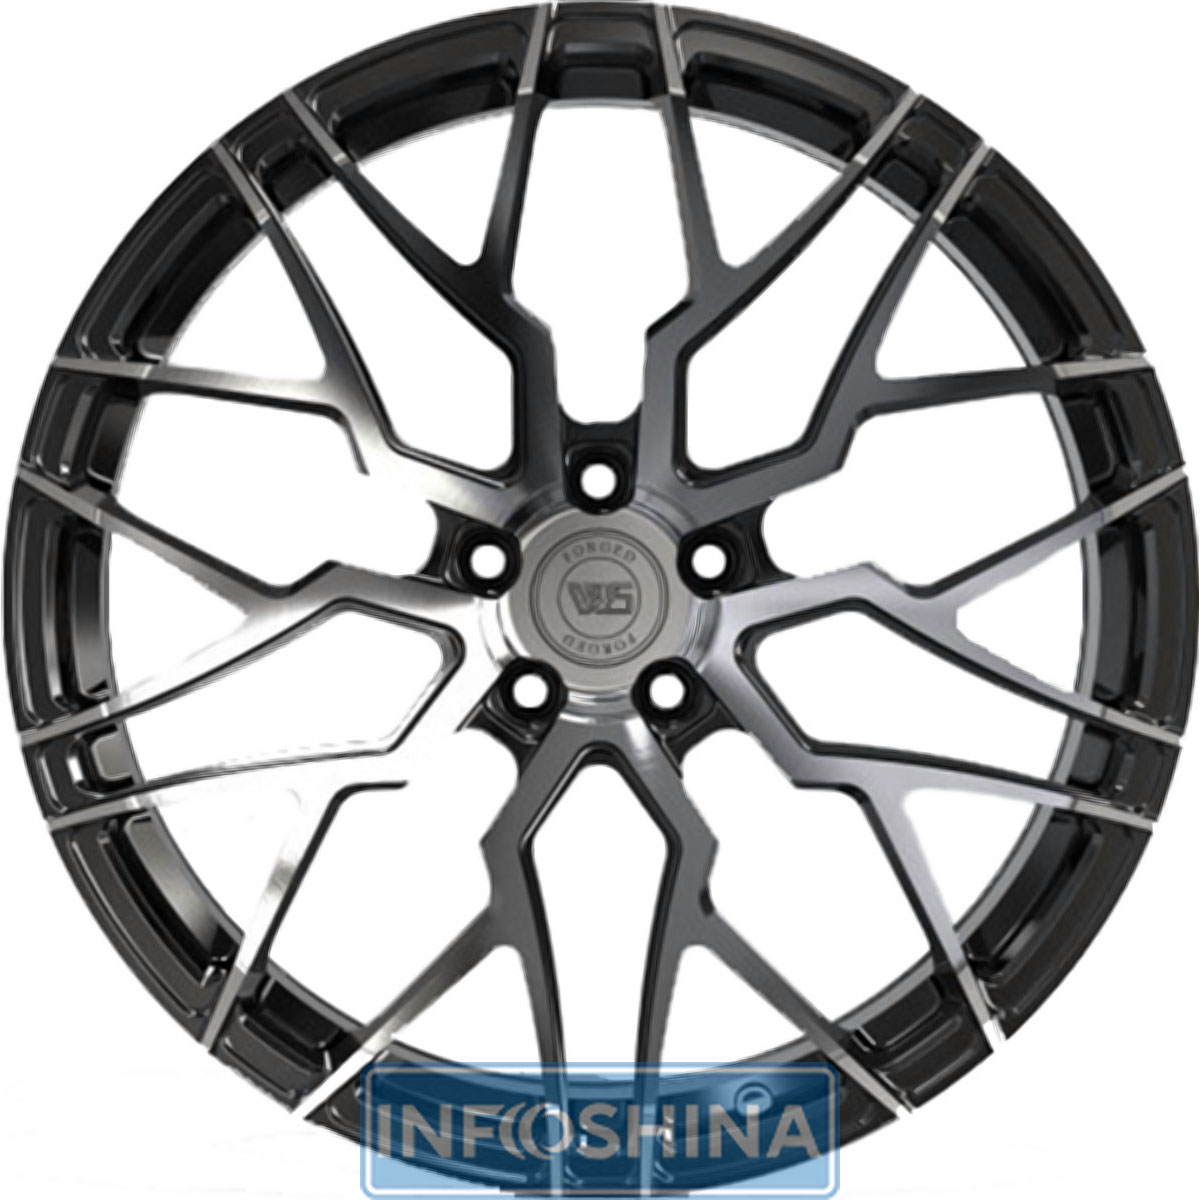 Купить диски WS Forged WS2270 Gloss Black With Machined Face R20 W10 PCD5x112 ET19 DIA66.5